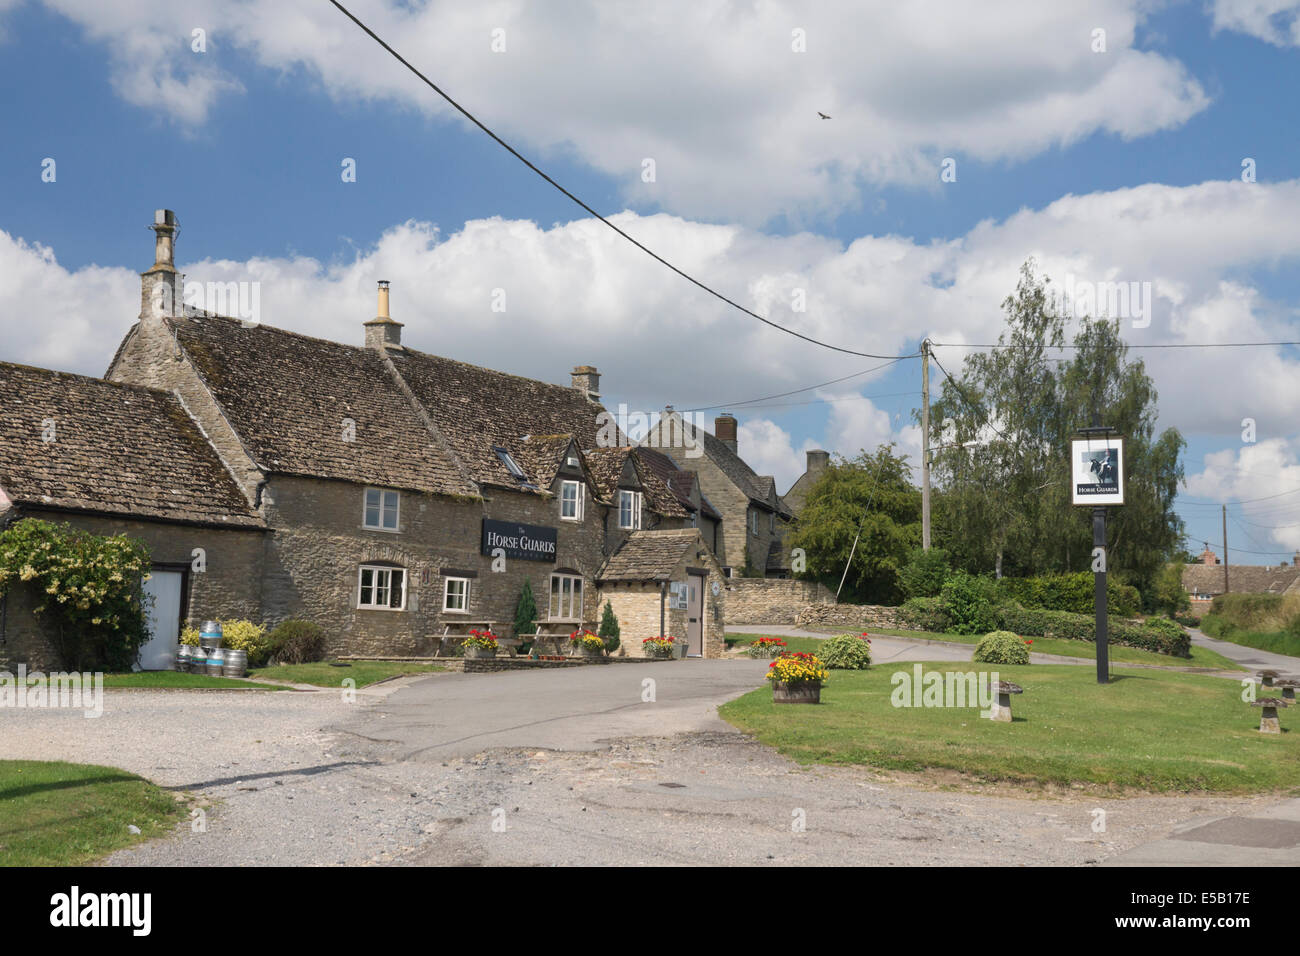 The Horse Guards Pub at Brokenborough, near Malmesbury Wiltshire England UK. A typical cotswolds country Pub Stock Photo